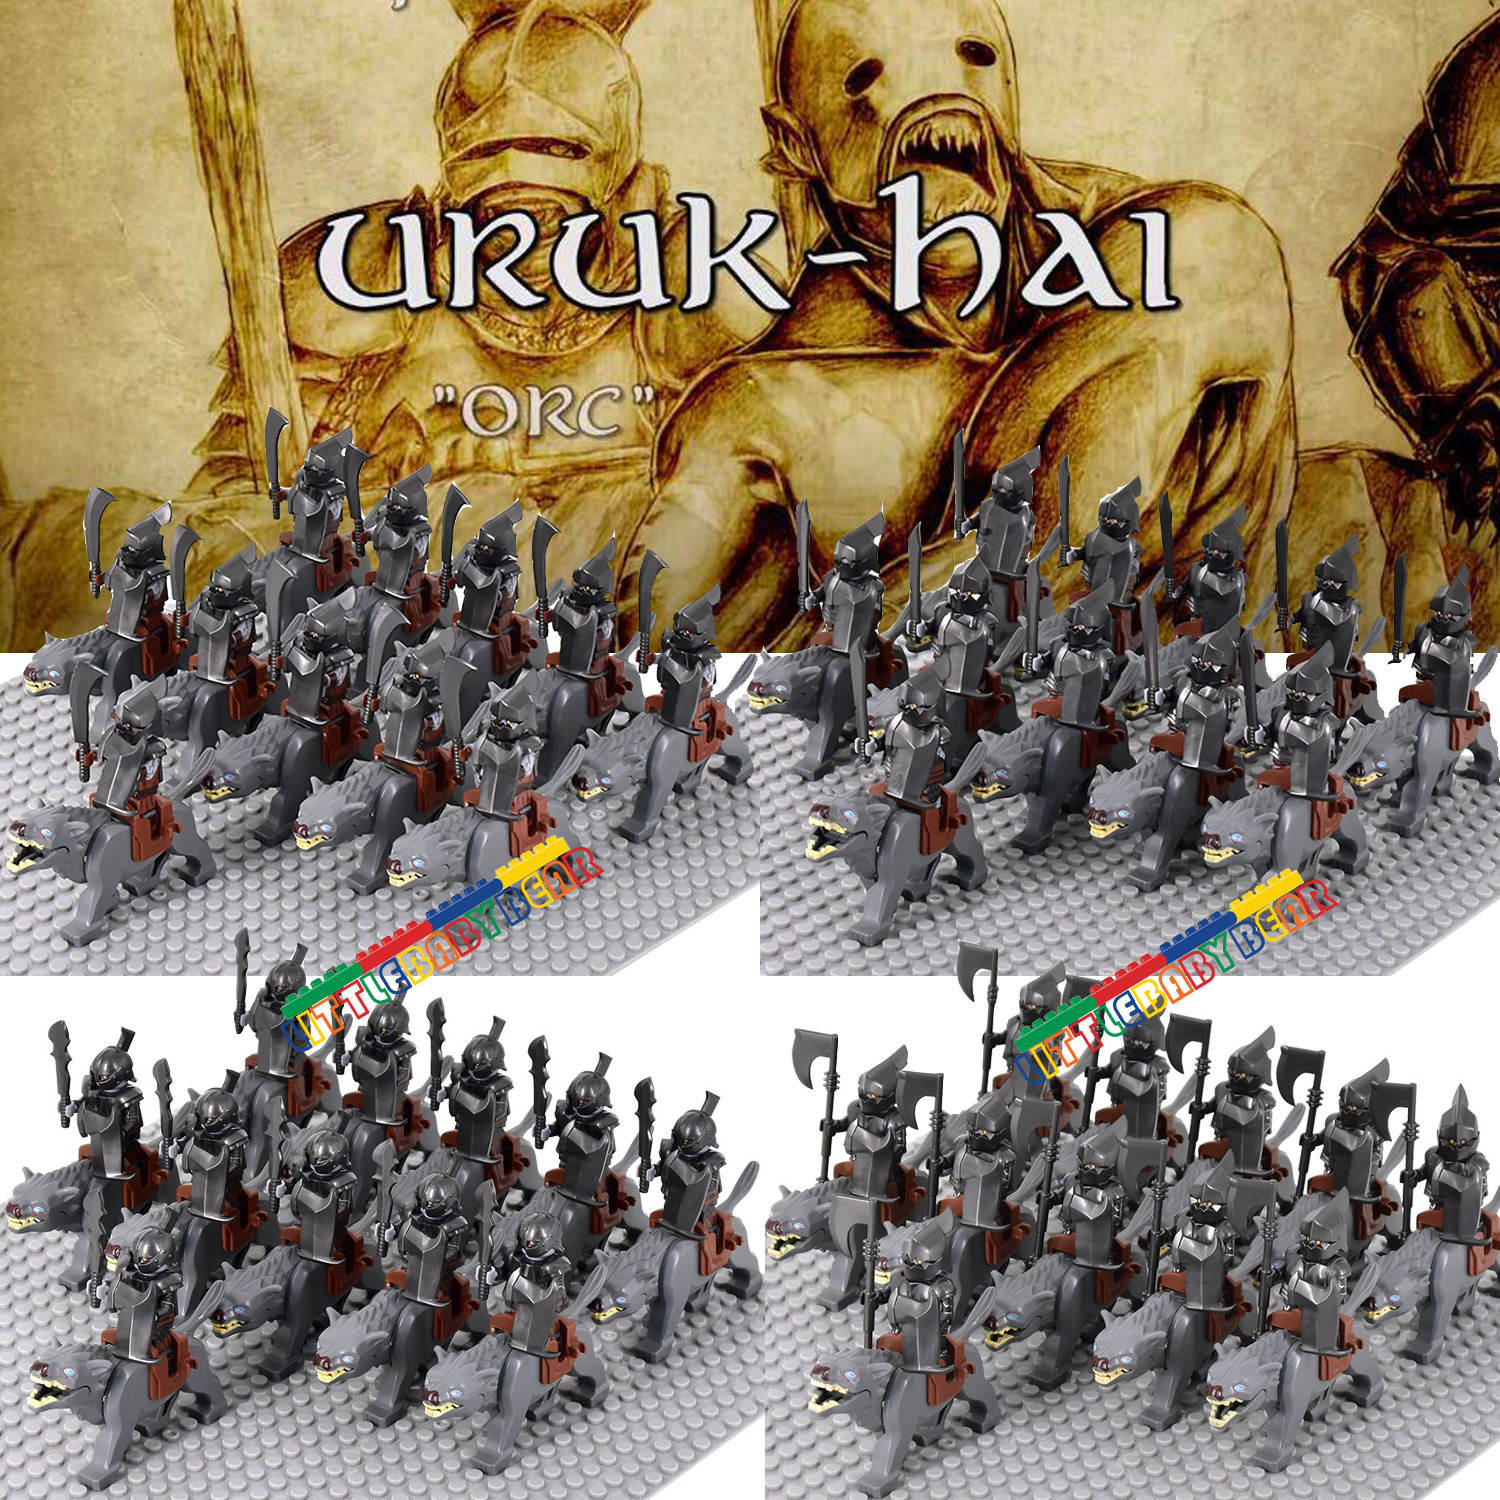 NEW Uruk-hai Wolf Riding Army-22PCS Lord Of The Rings Hobbit Orc Minifigures Toy